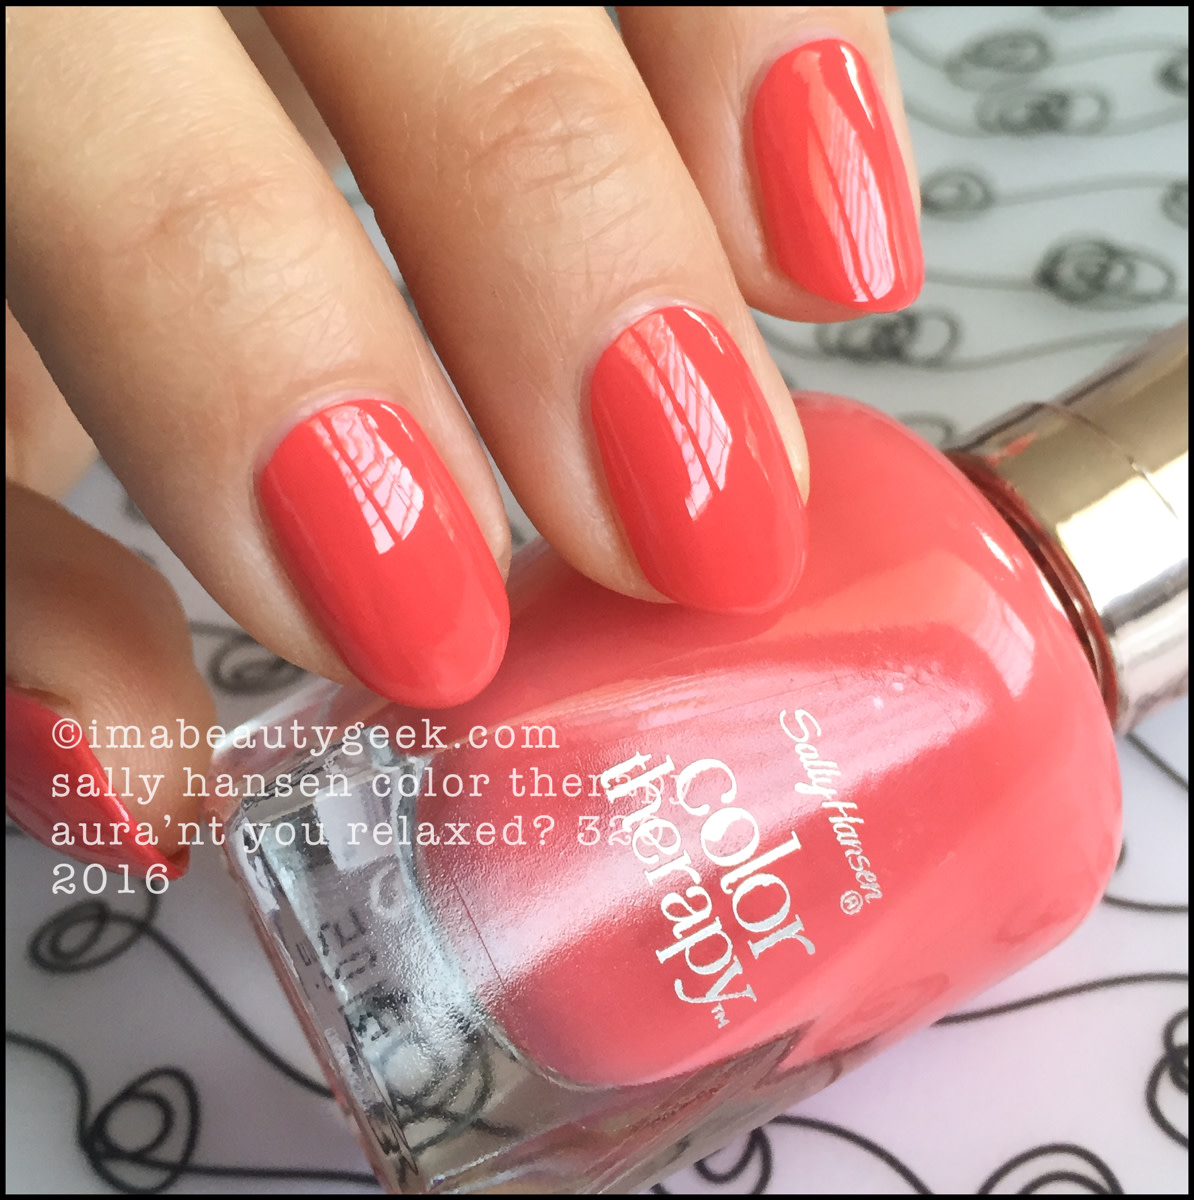 SALLY HANSEN COLOR THERAPY SWATCHES & REVIEW - Beautygeeks